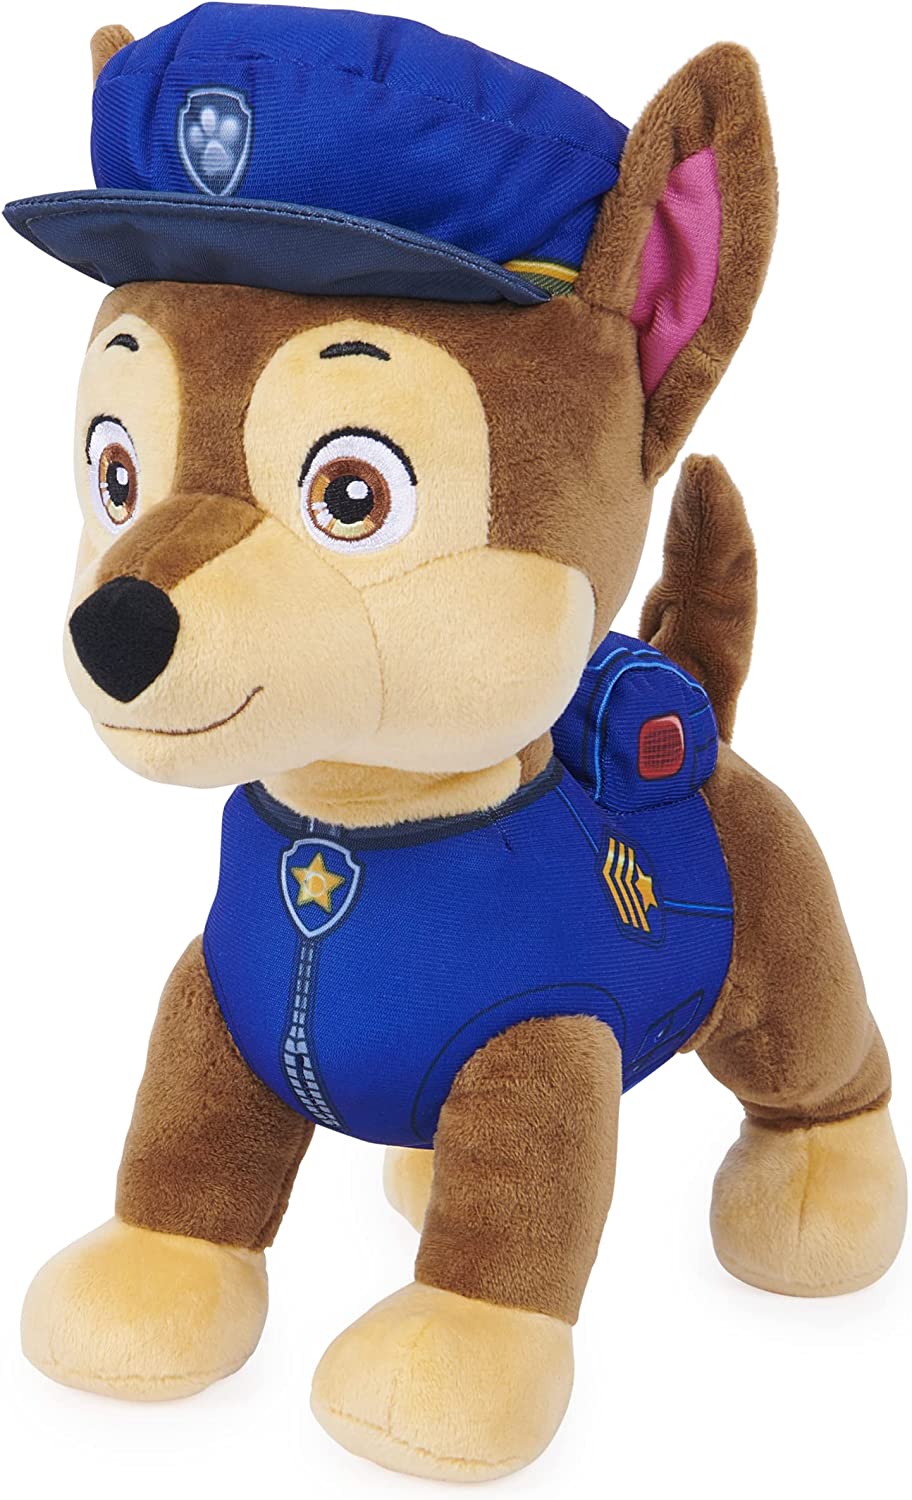 PAW Patrol, Talking Chase 30.5-cm-tall Interactive Plush Toy with Sounds, Phrase